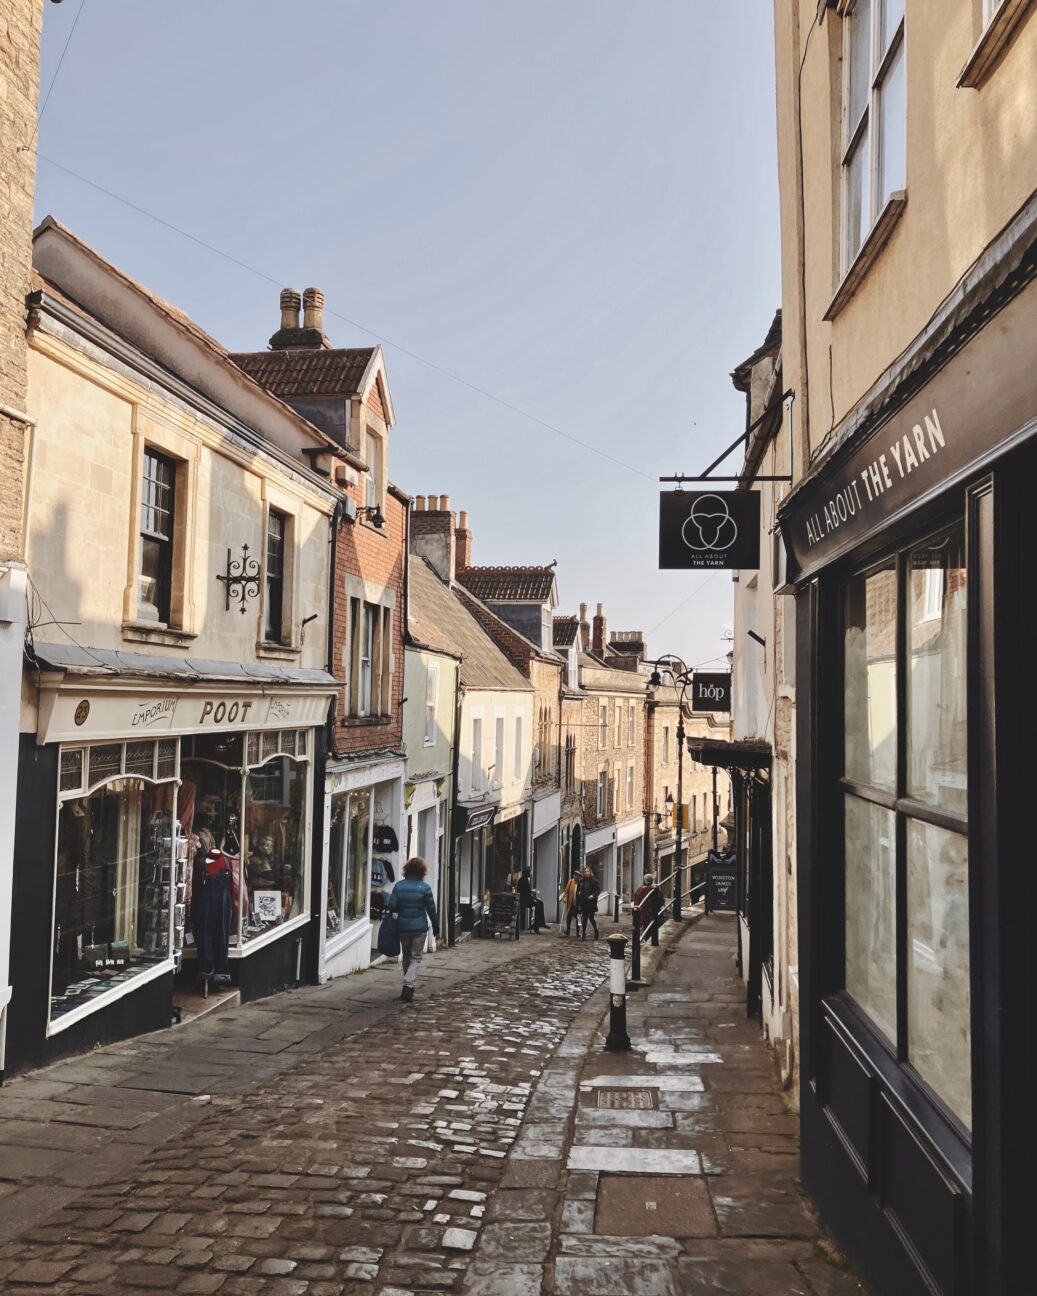 A cobbled street in Frome